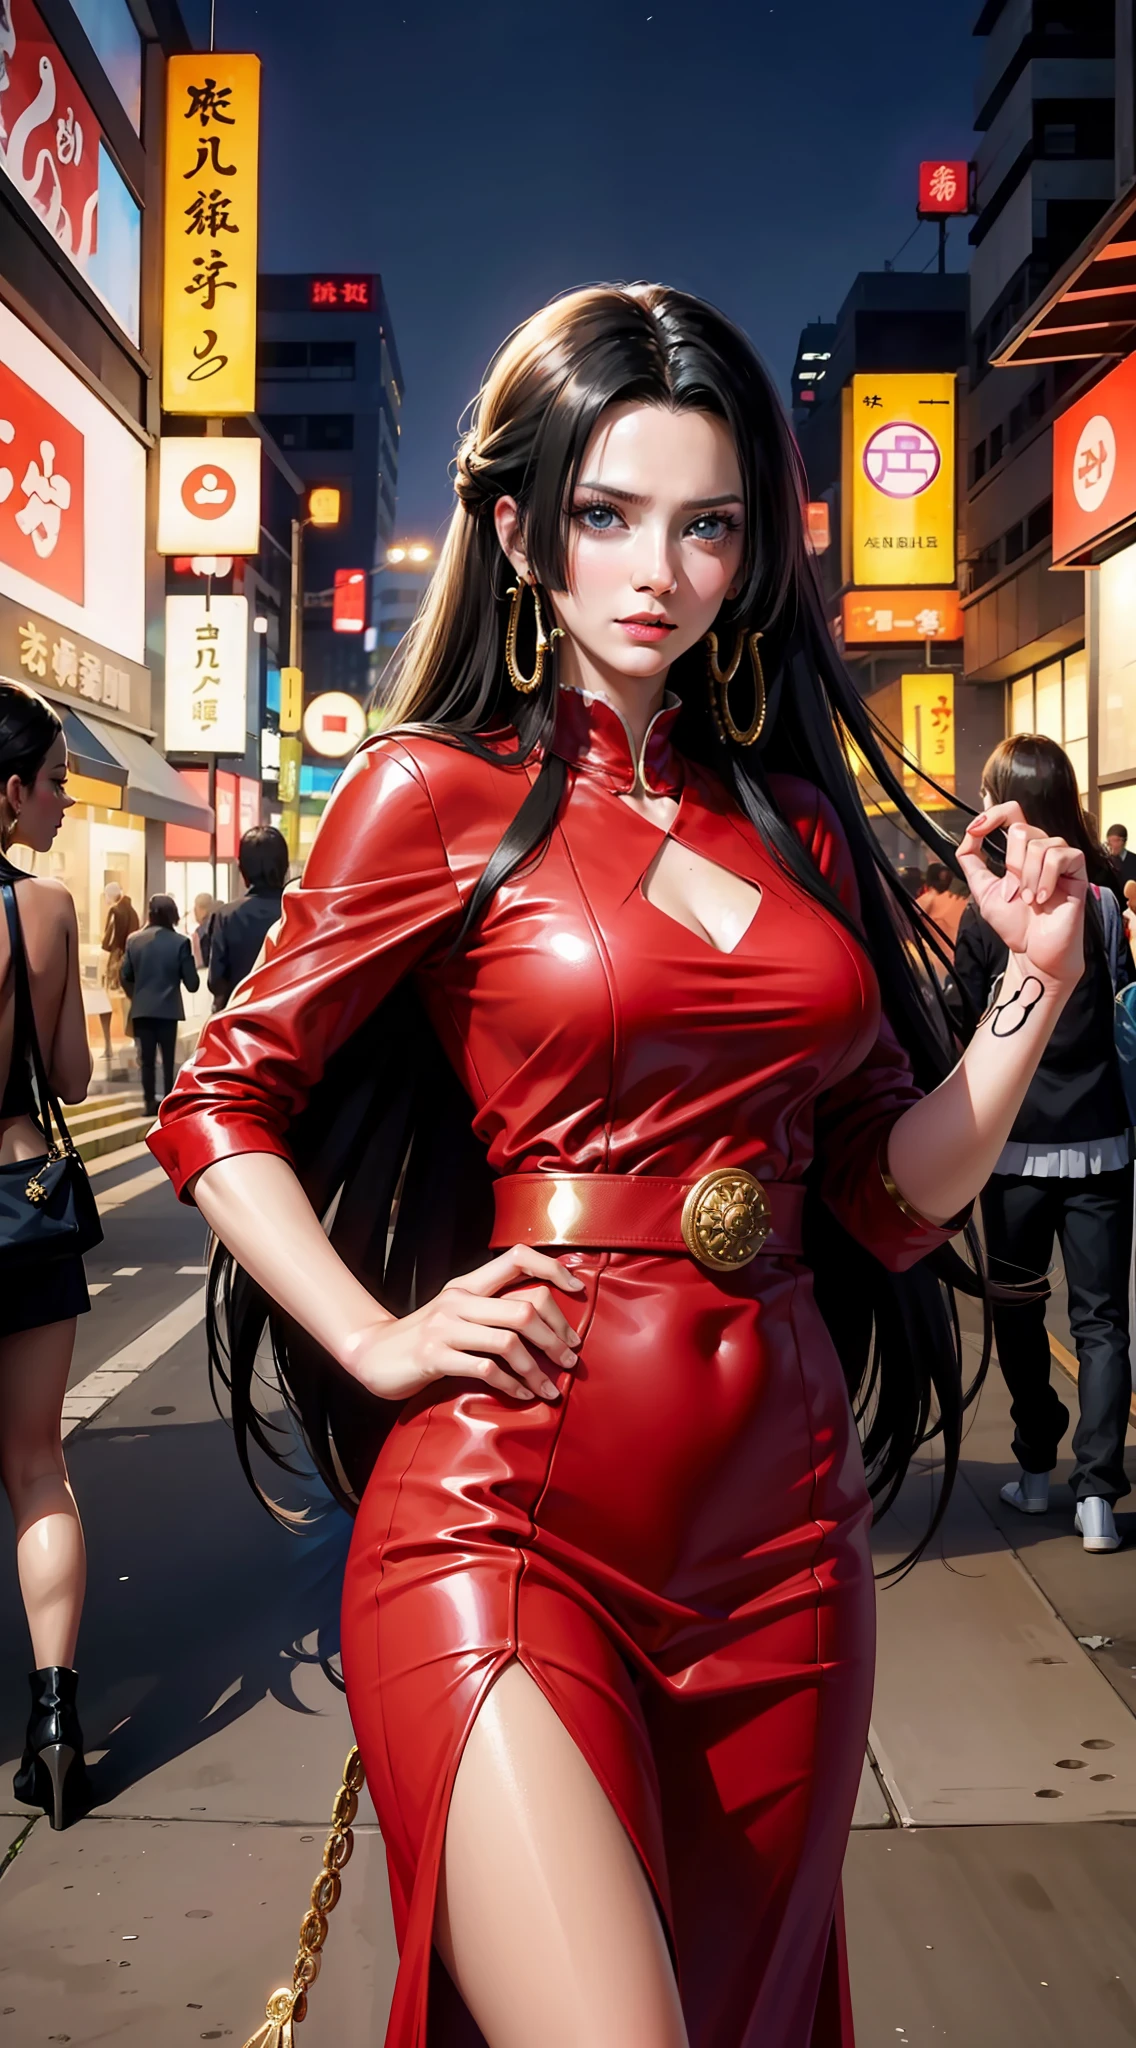 boa hancock from anime one piece, beautiful woman, very beautiful, perfect body, perfect breasts, dark hair, long hair, updo hair, slightly smiling expression, wearing expensive red dress very beautiful dress, beautiful dress, being in a public place, being in tokyo city, night, standing, Realism, masterpiece, textured skin, super detailed, high detailed, high quality, best quality, 1080p, 16k